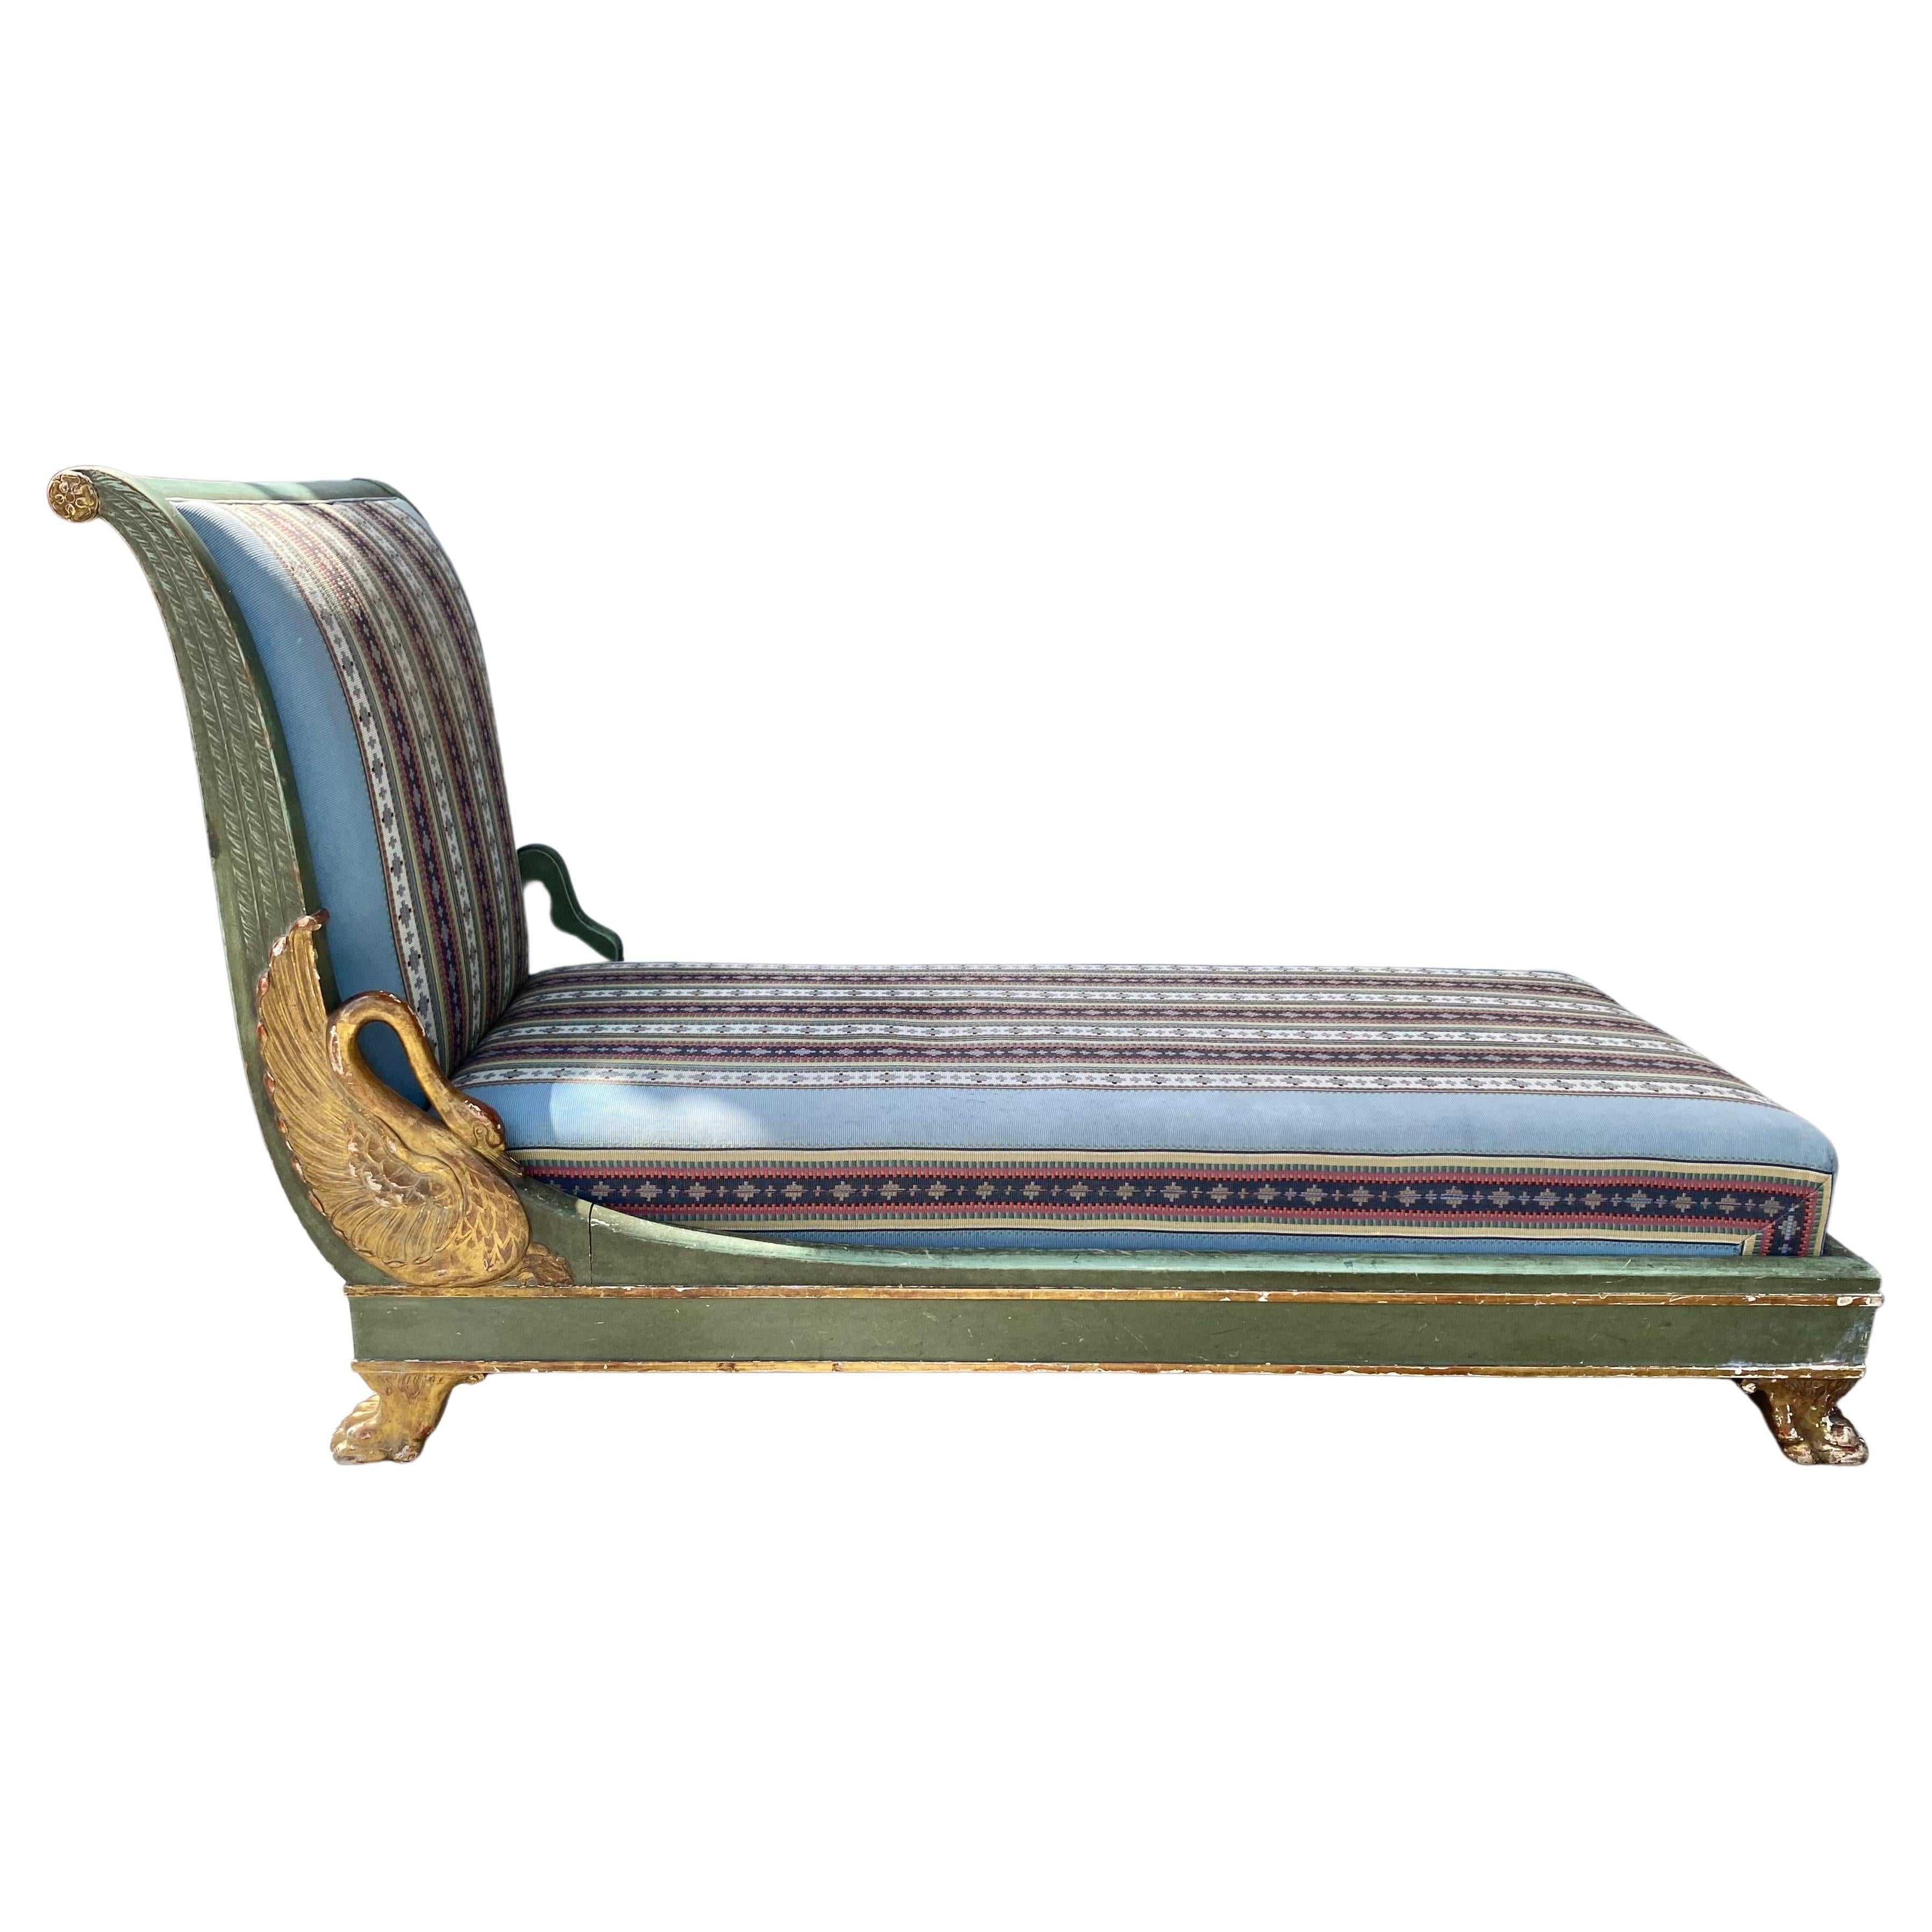 French Empire Style Painted Wooden Daybed / Chaise with carved swan side